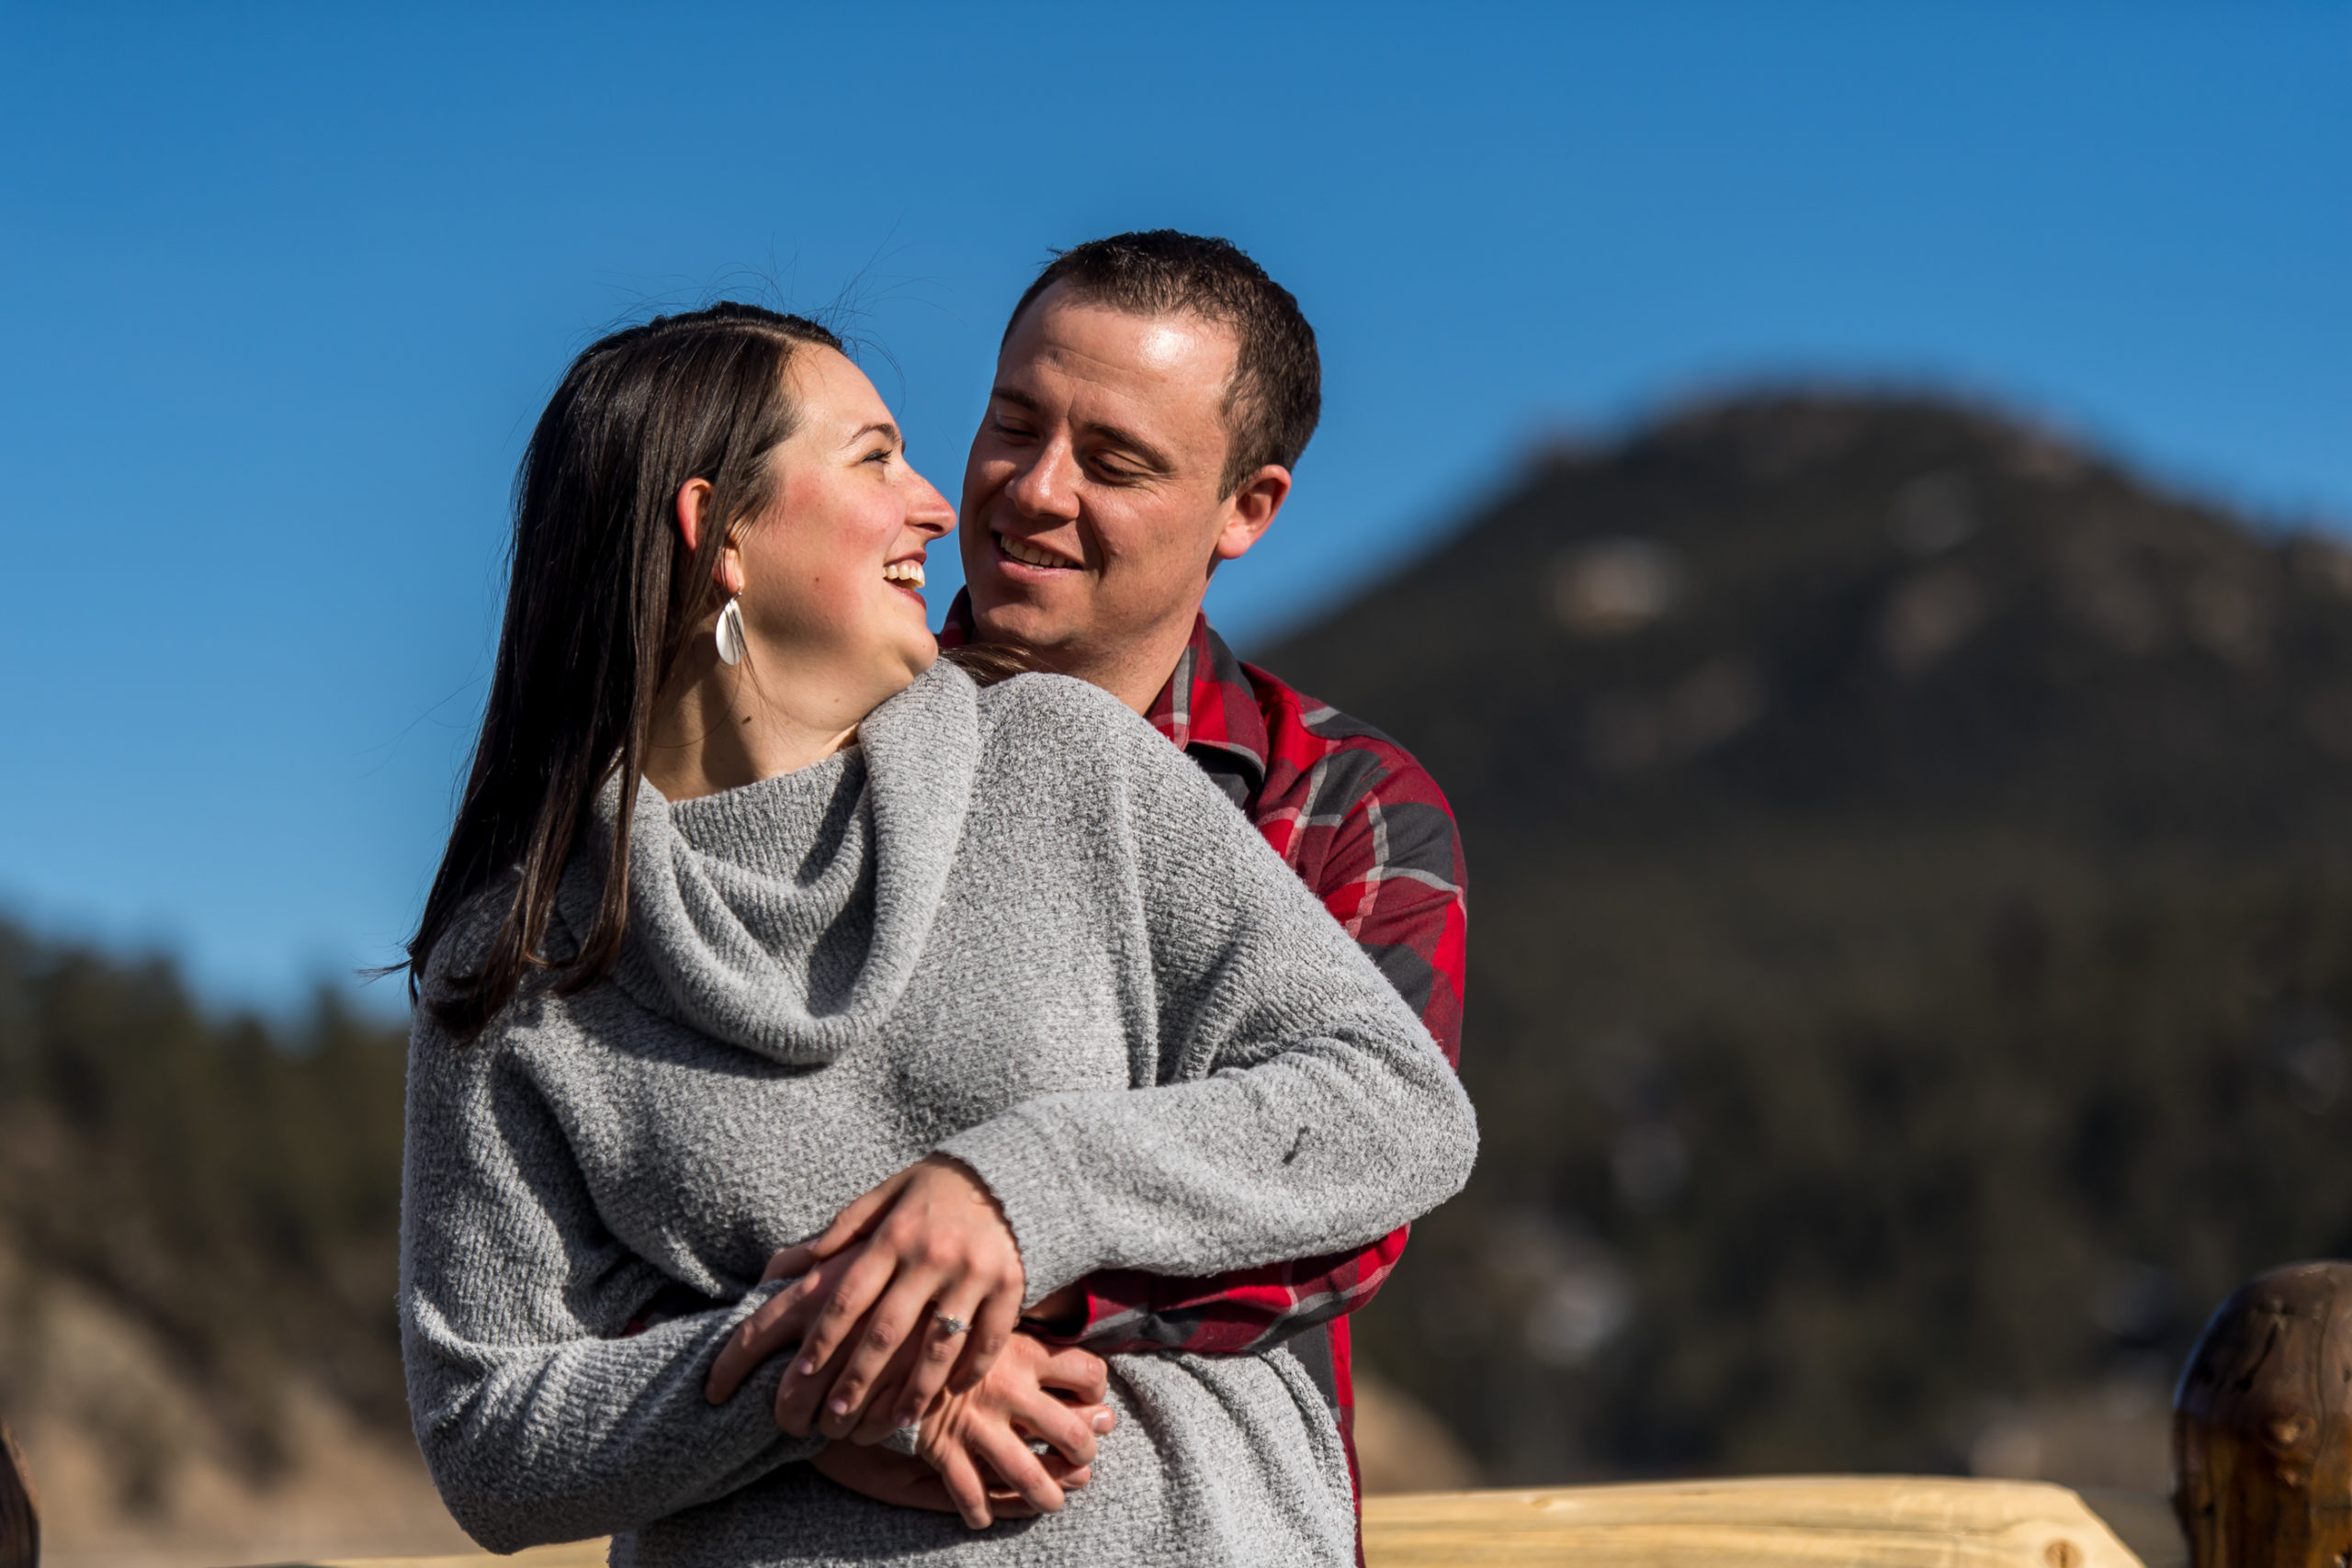 Evergreen Lake engagement photos in Colorado with Rachel and Jeff.